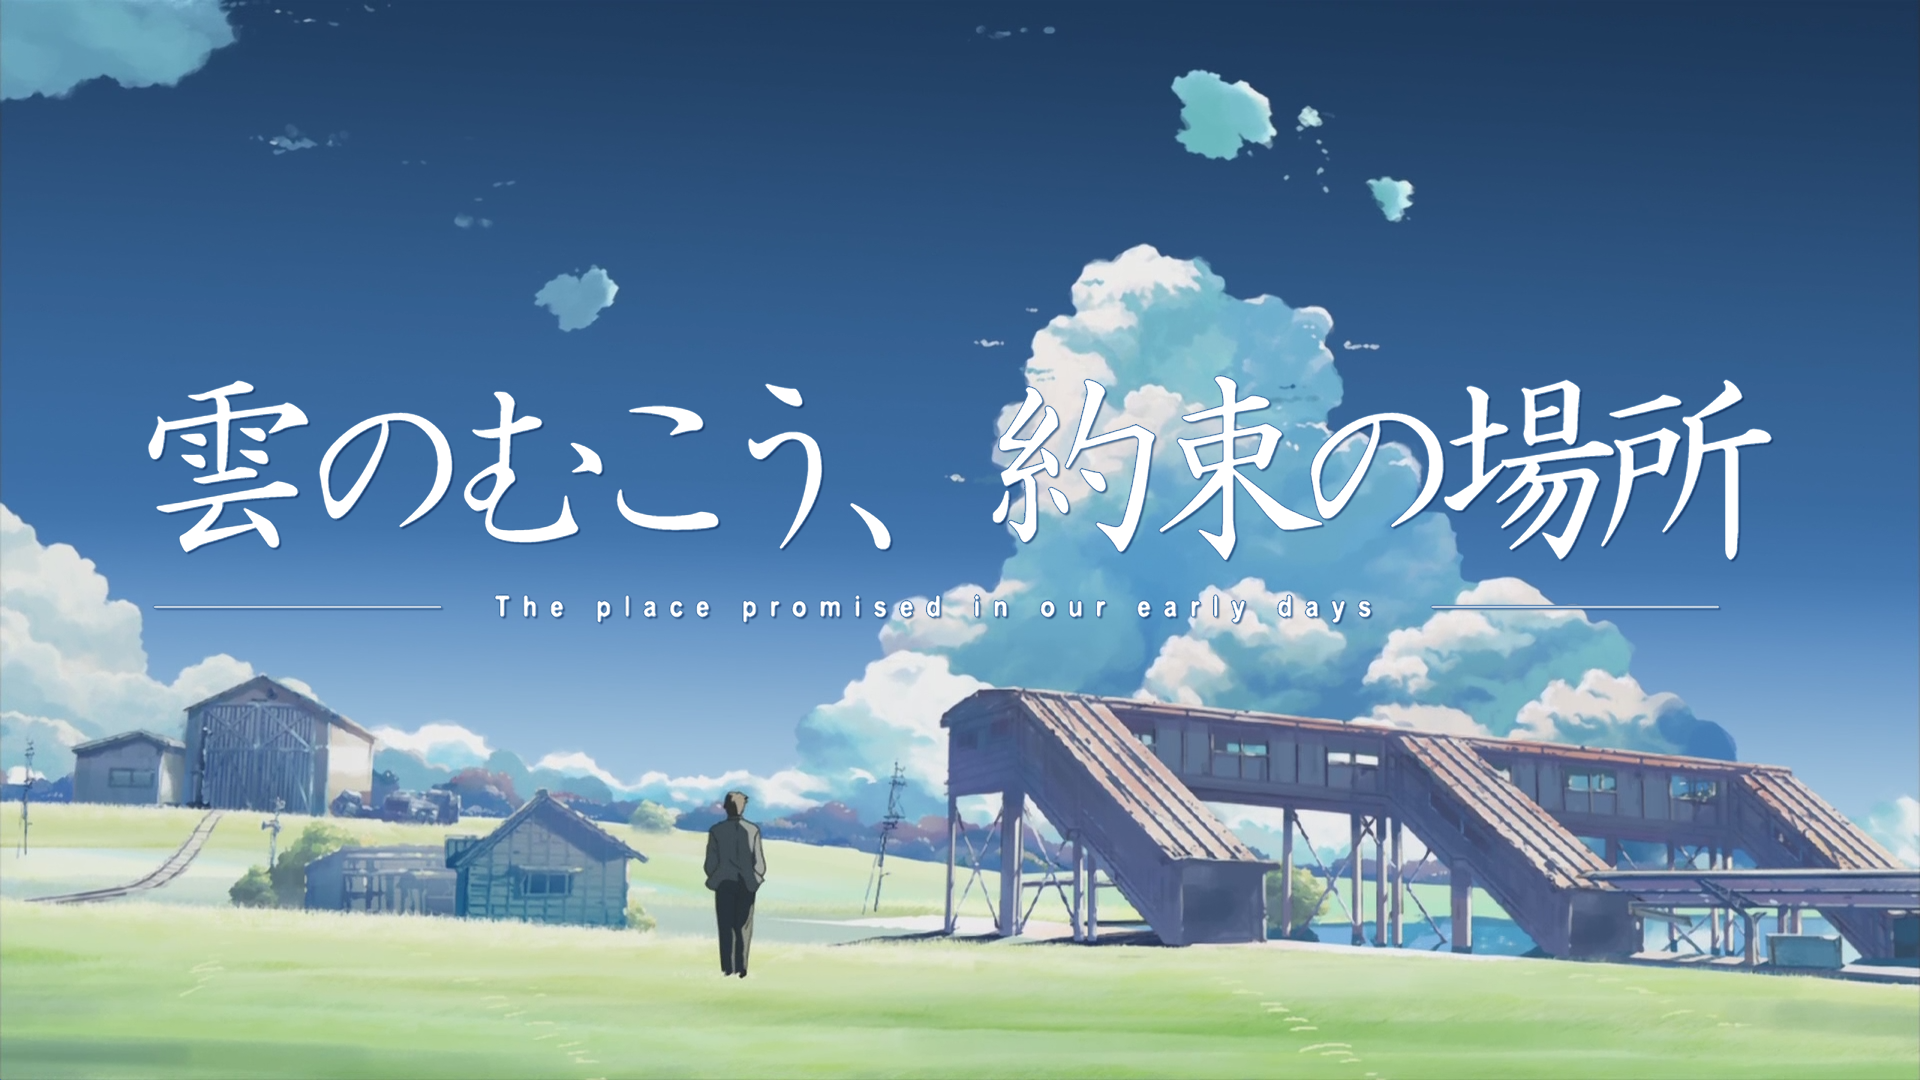 clouds, Makoto Shinkai, anime, The Place Promised in Our Early Days, Beyond The Clouds, skyscapes - desktop wallpaper